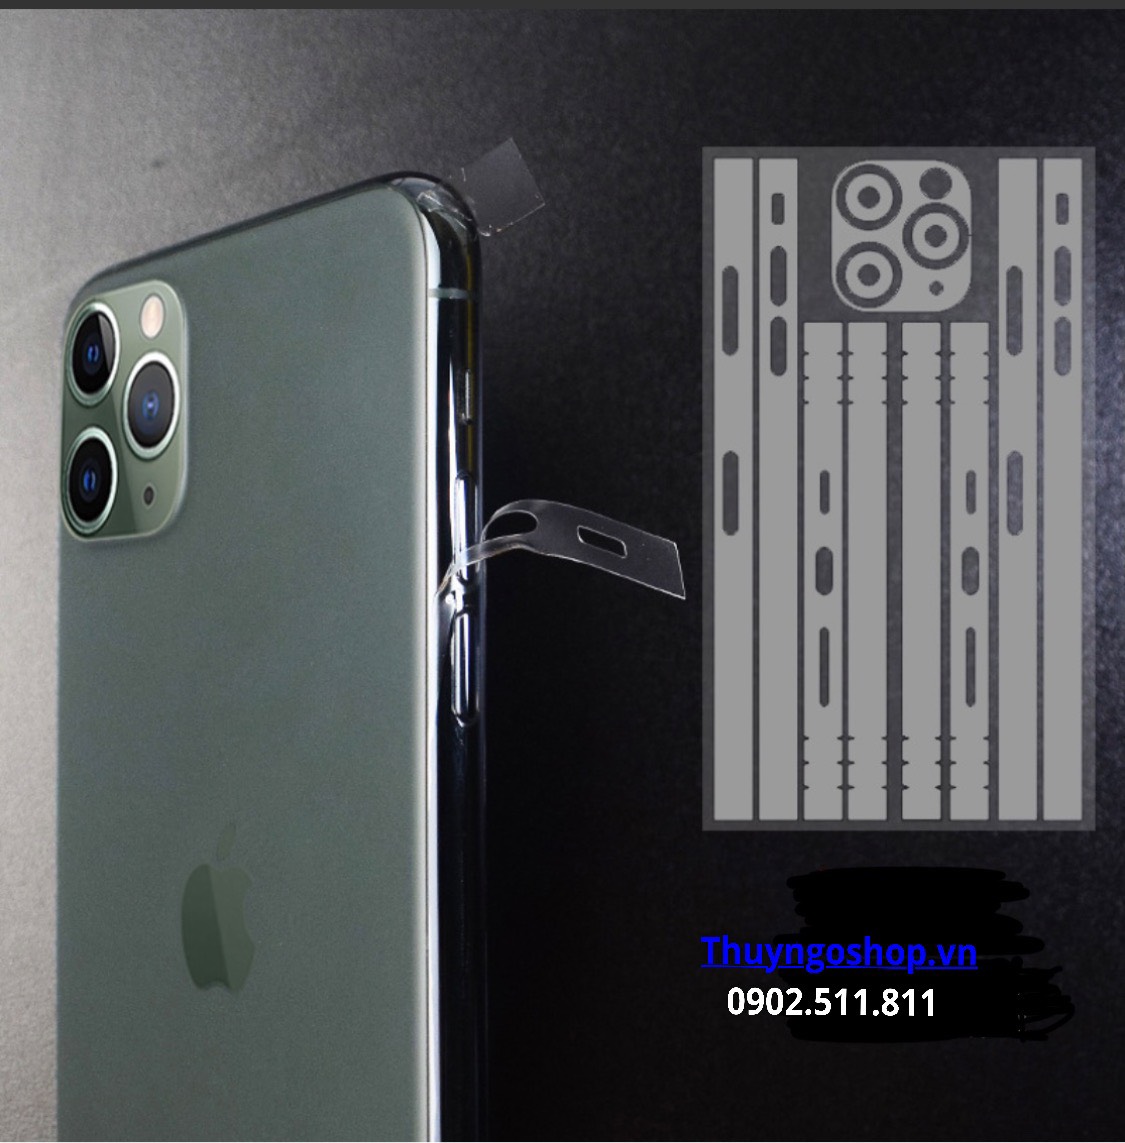 PPF 4 cạnh viền trong suốt / mờ Iphone 11 Pro Max